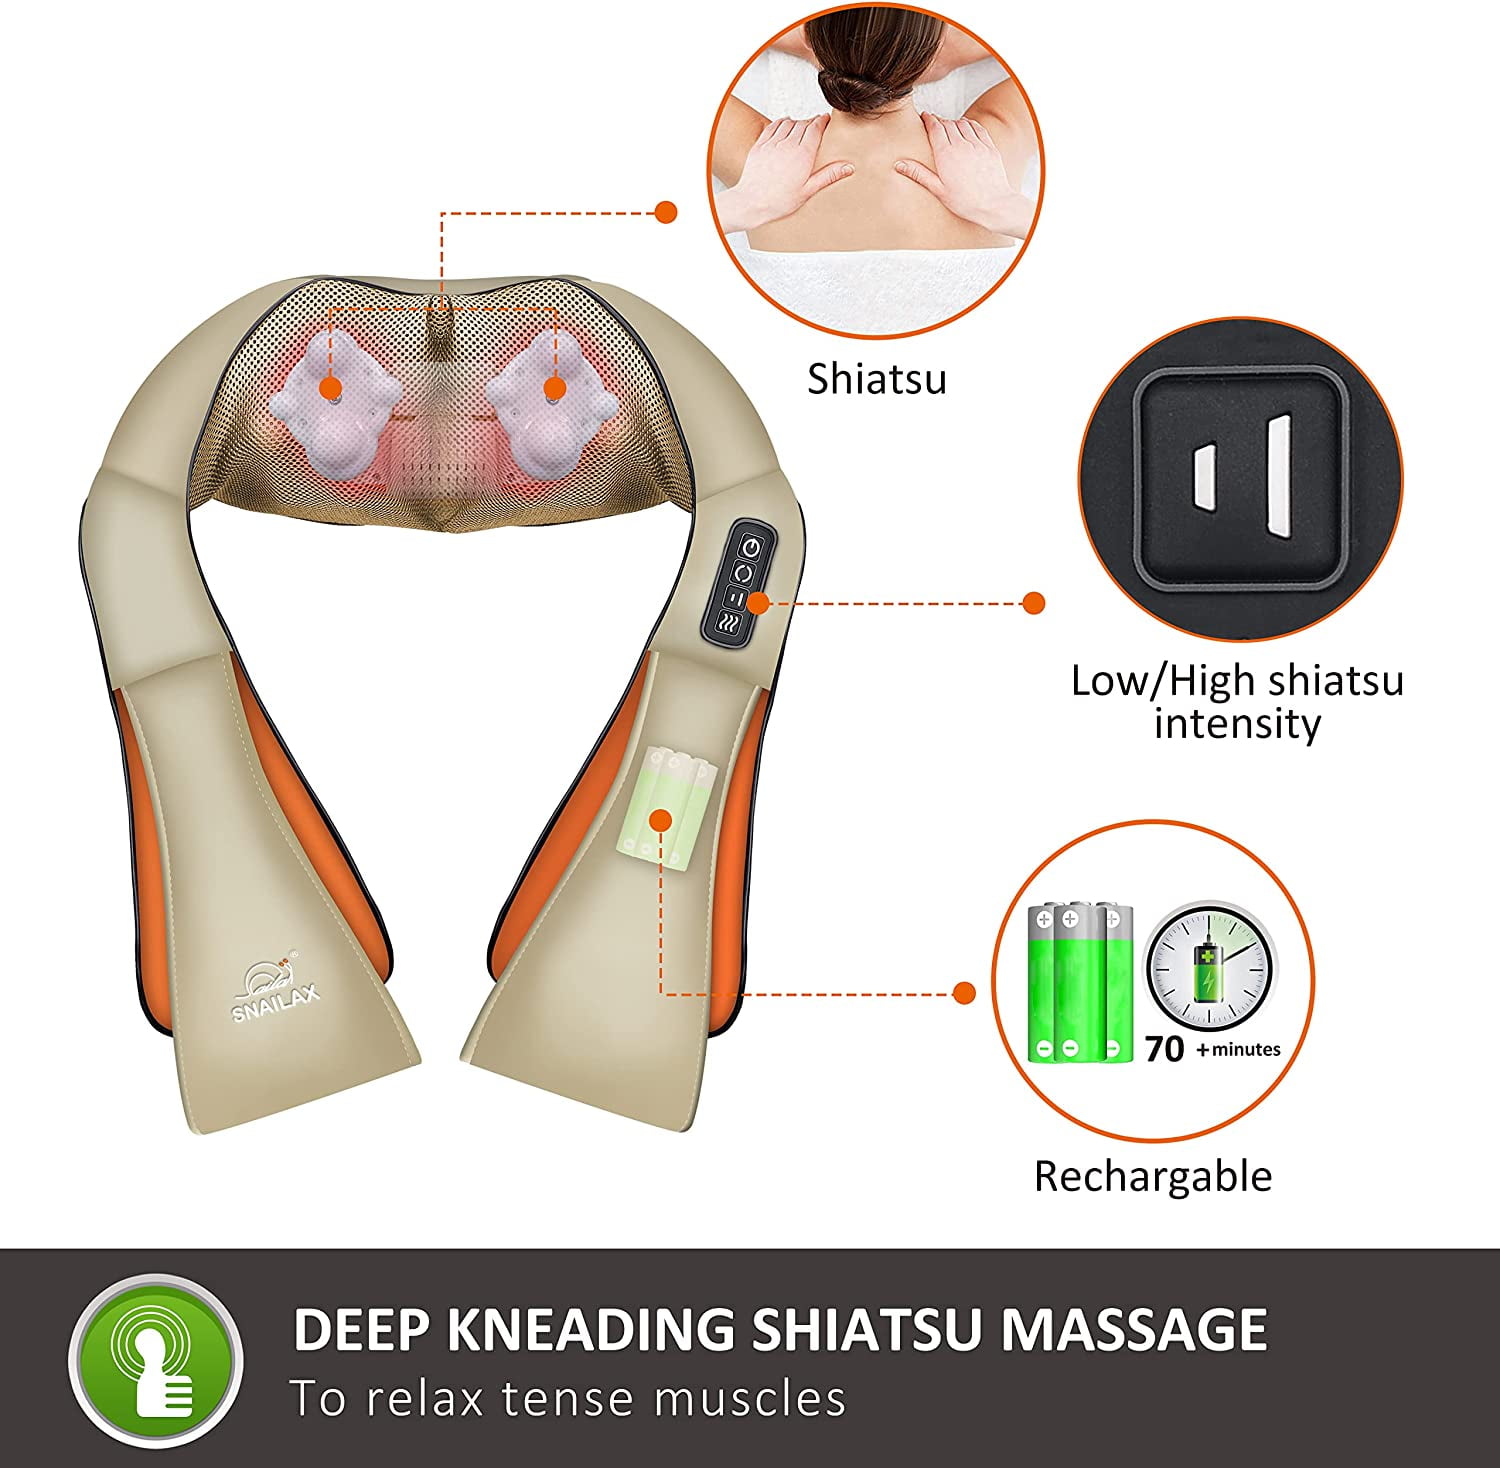 Snailax Shiatsu Neck and Shoulder Massager, Gifts for Men,Back Massager  with Heat, Deep Kneading Ele…See more Snailax Shiatsu Neck and Shoulder